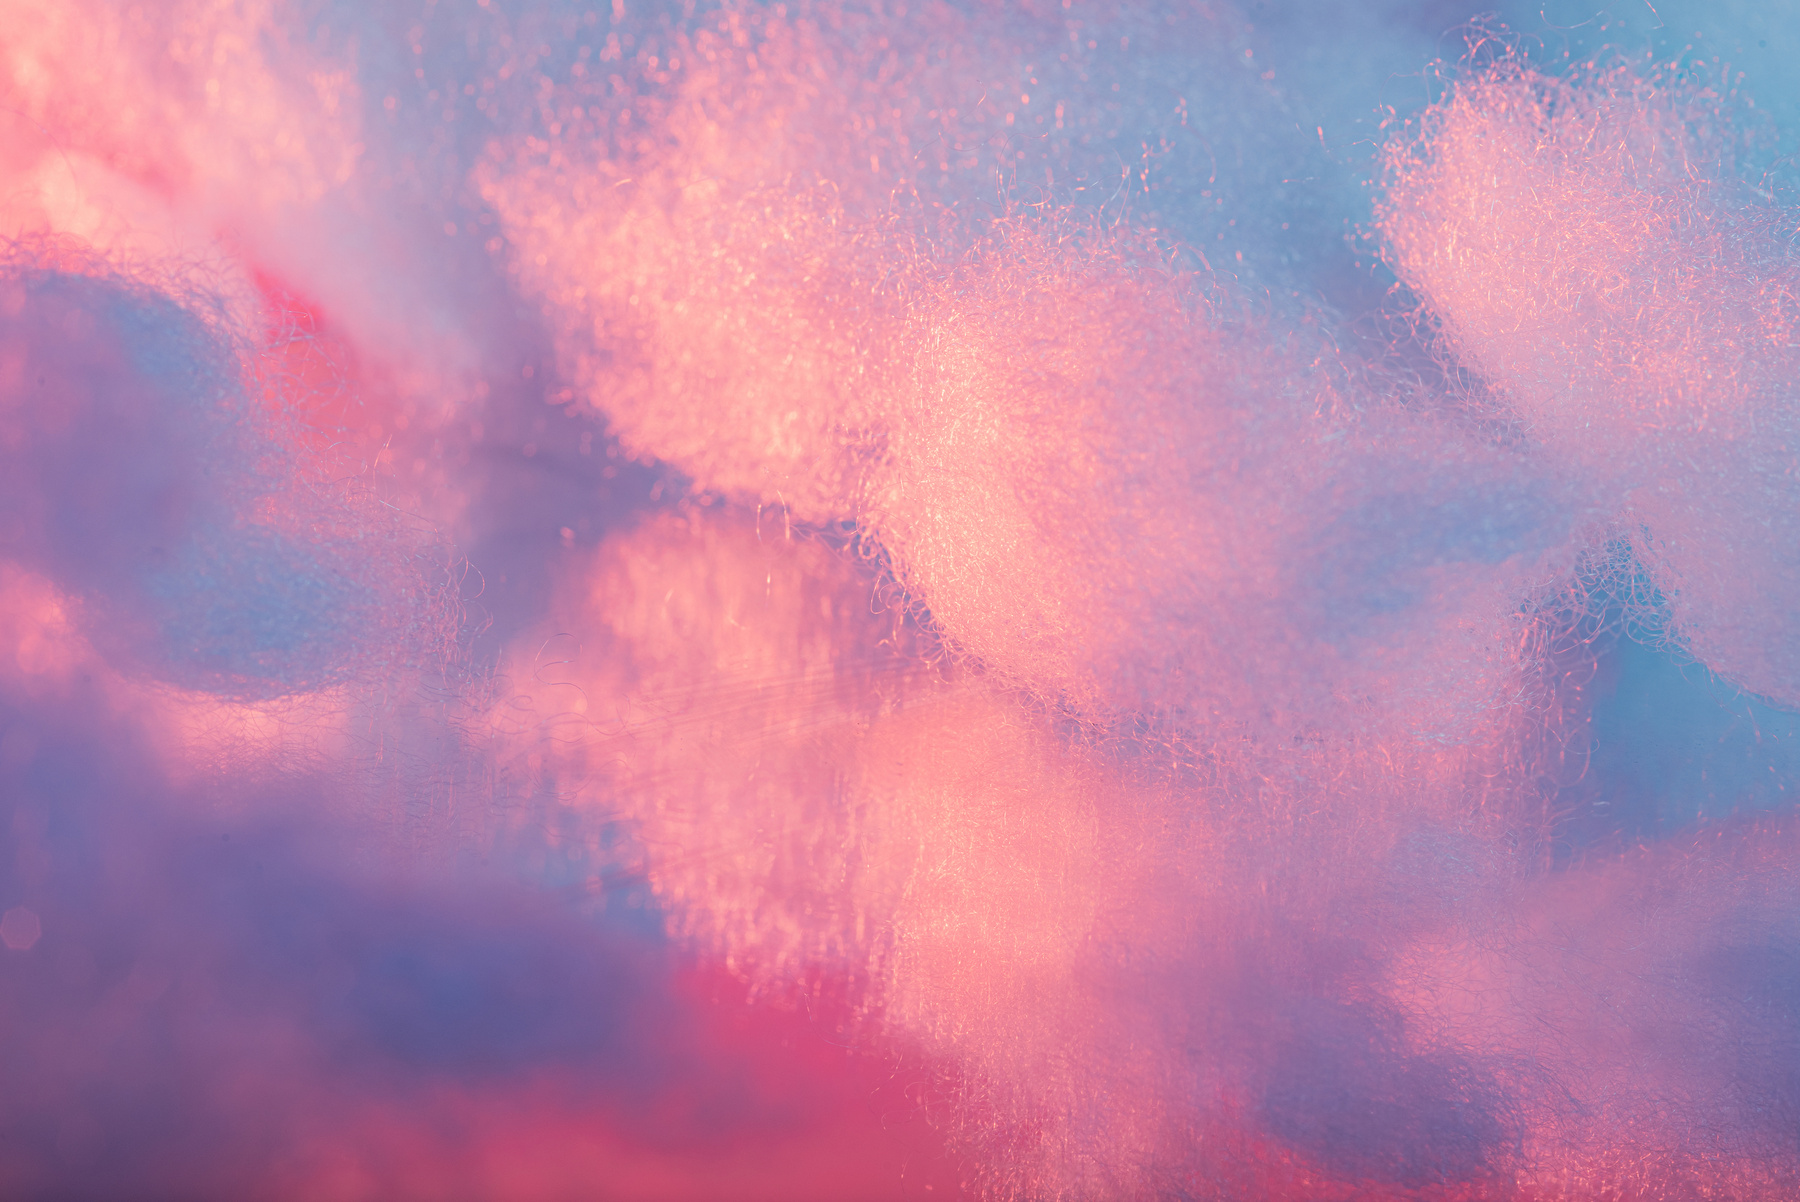 Grainy White Clouds on Pastel Gradient Background